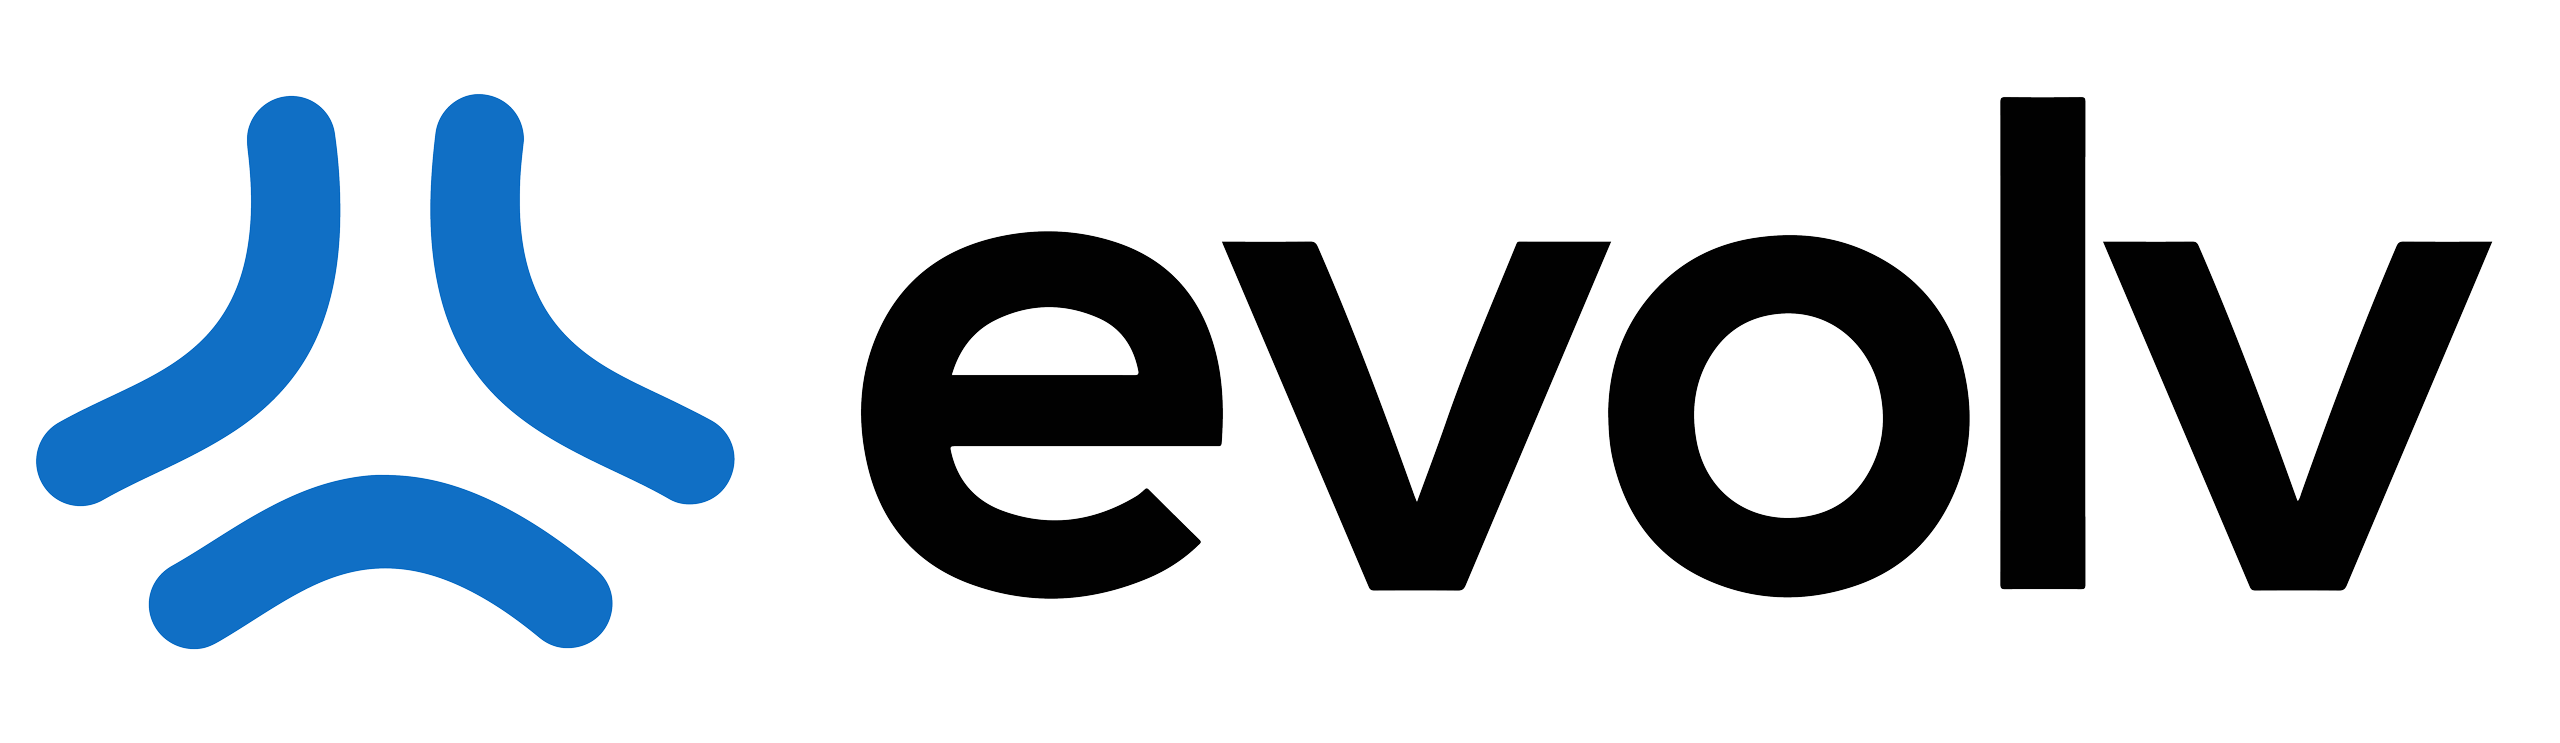 Elevate Your Business with Evolv | Traditions Bank